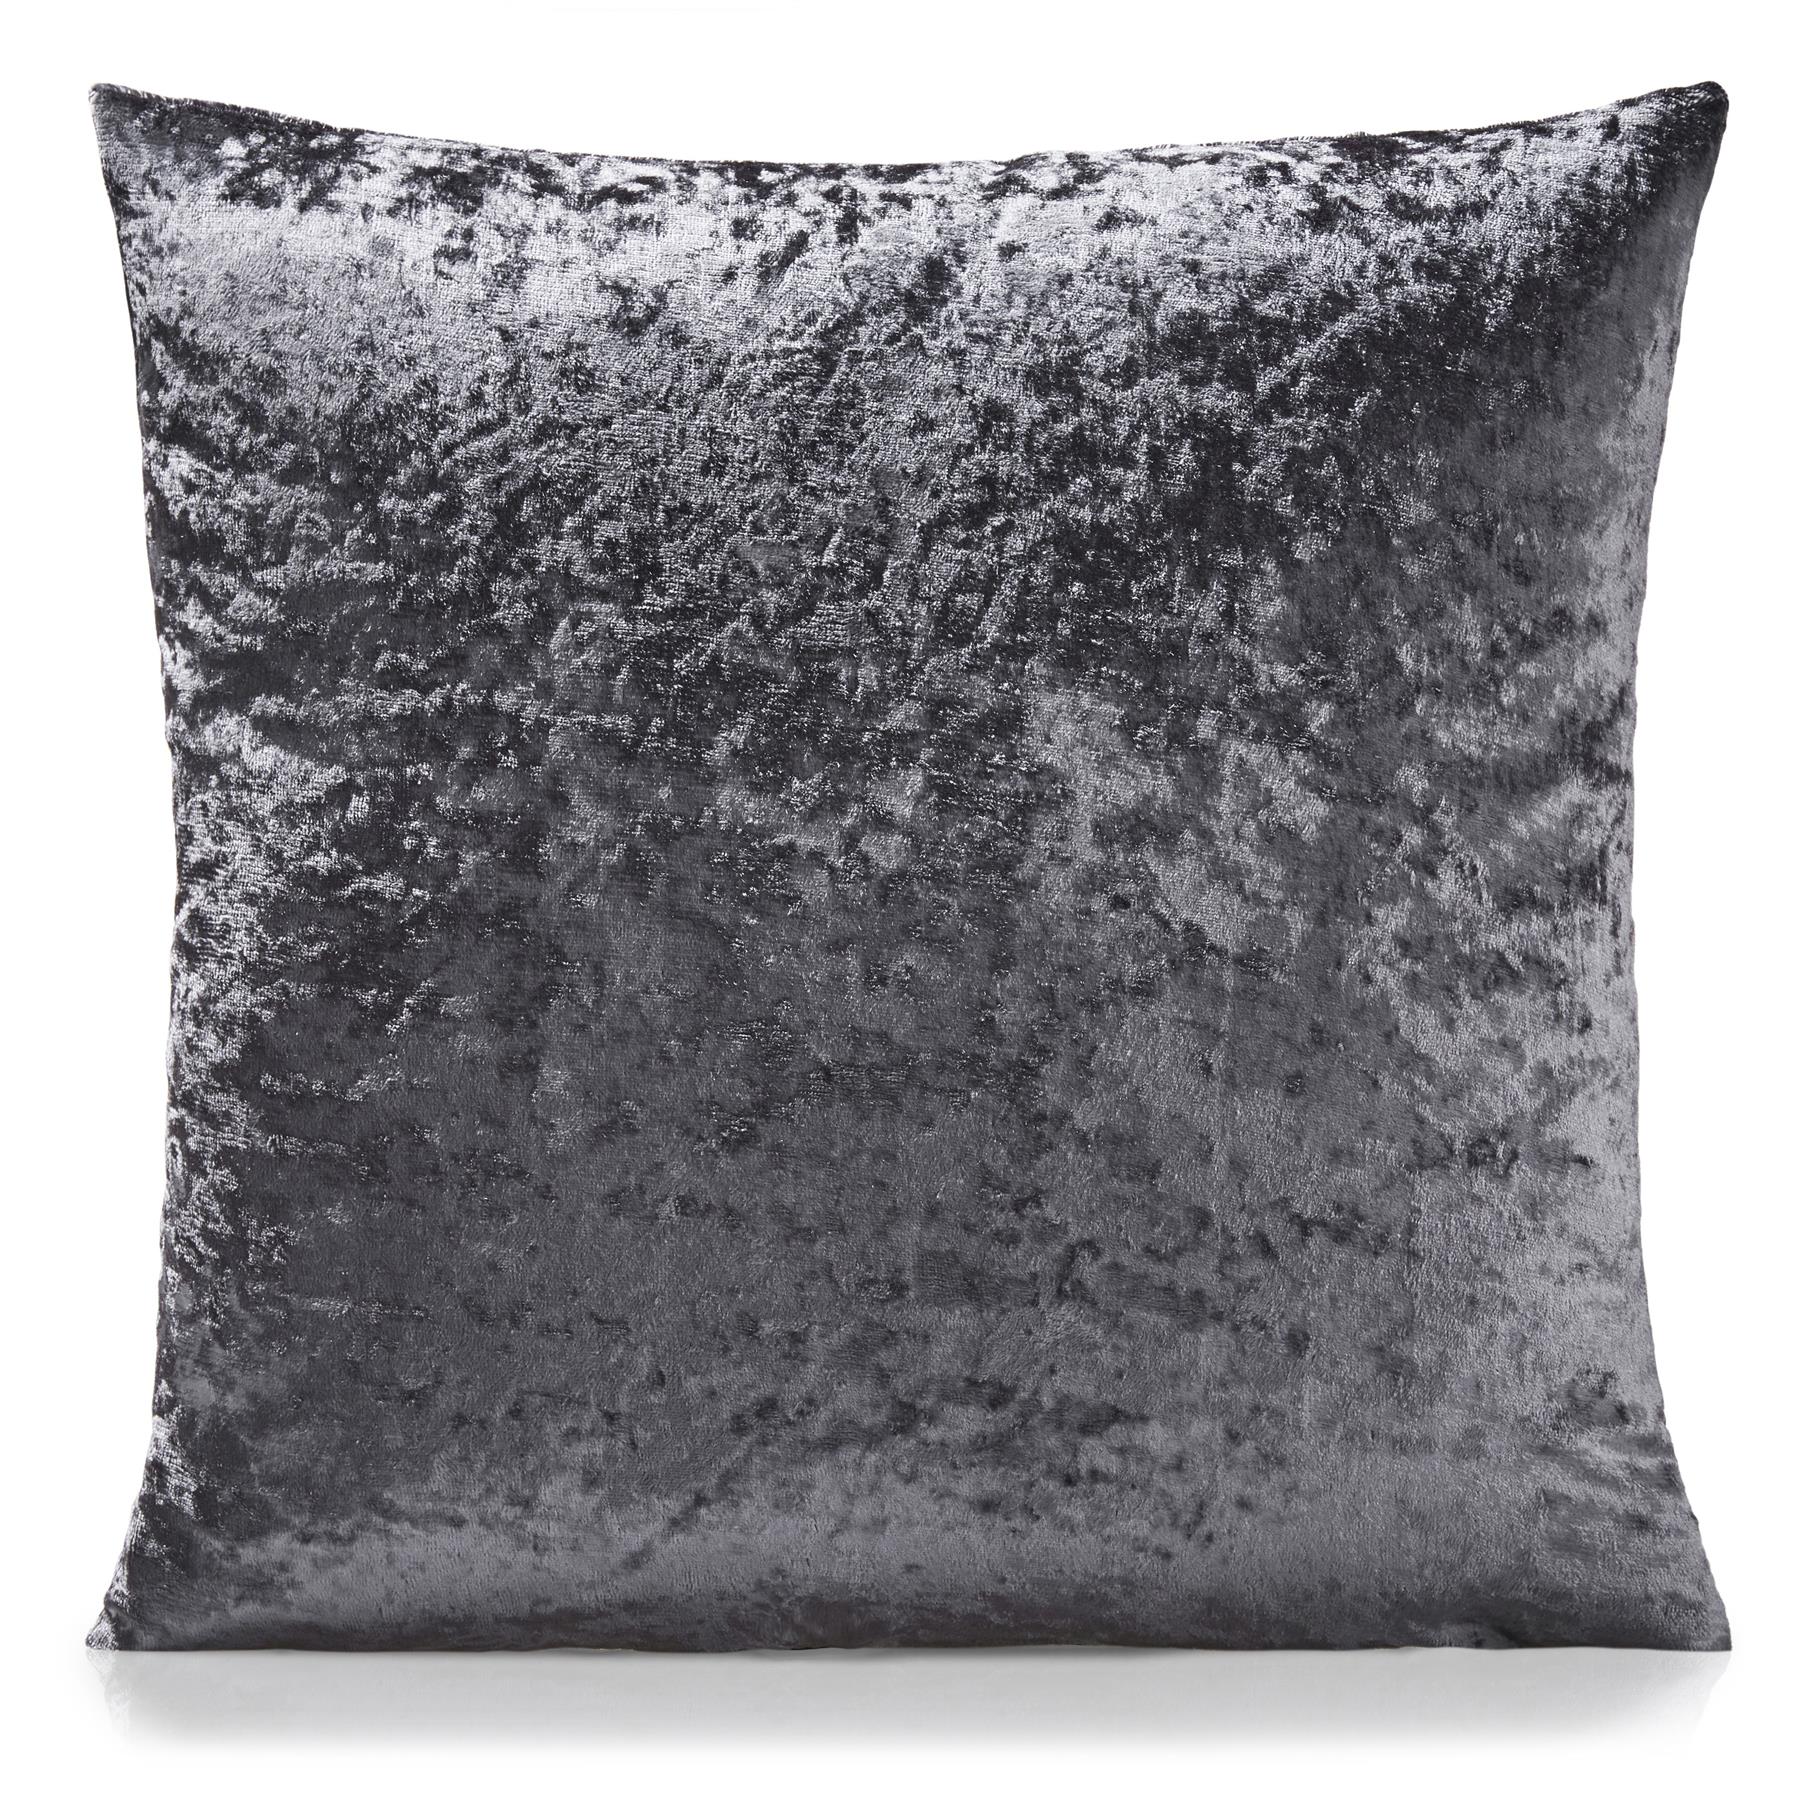 Charcoal Velvet Crushed Cushion Covers.